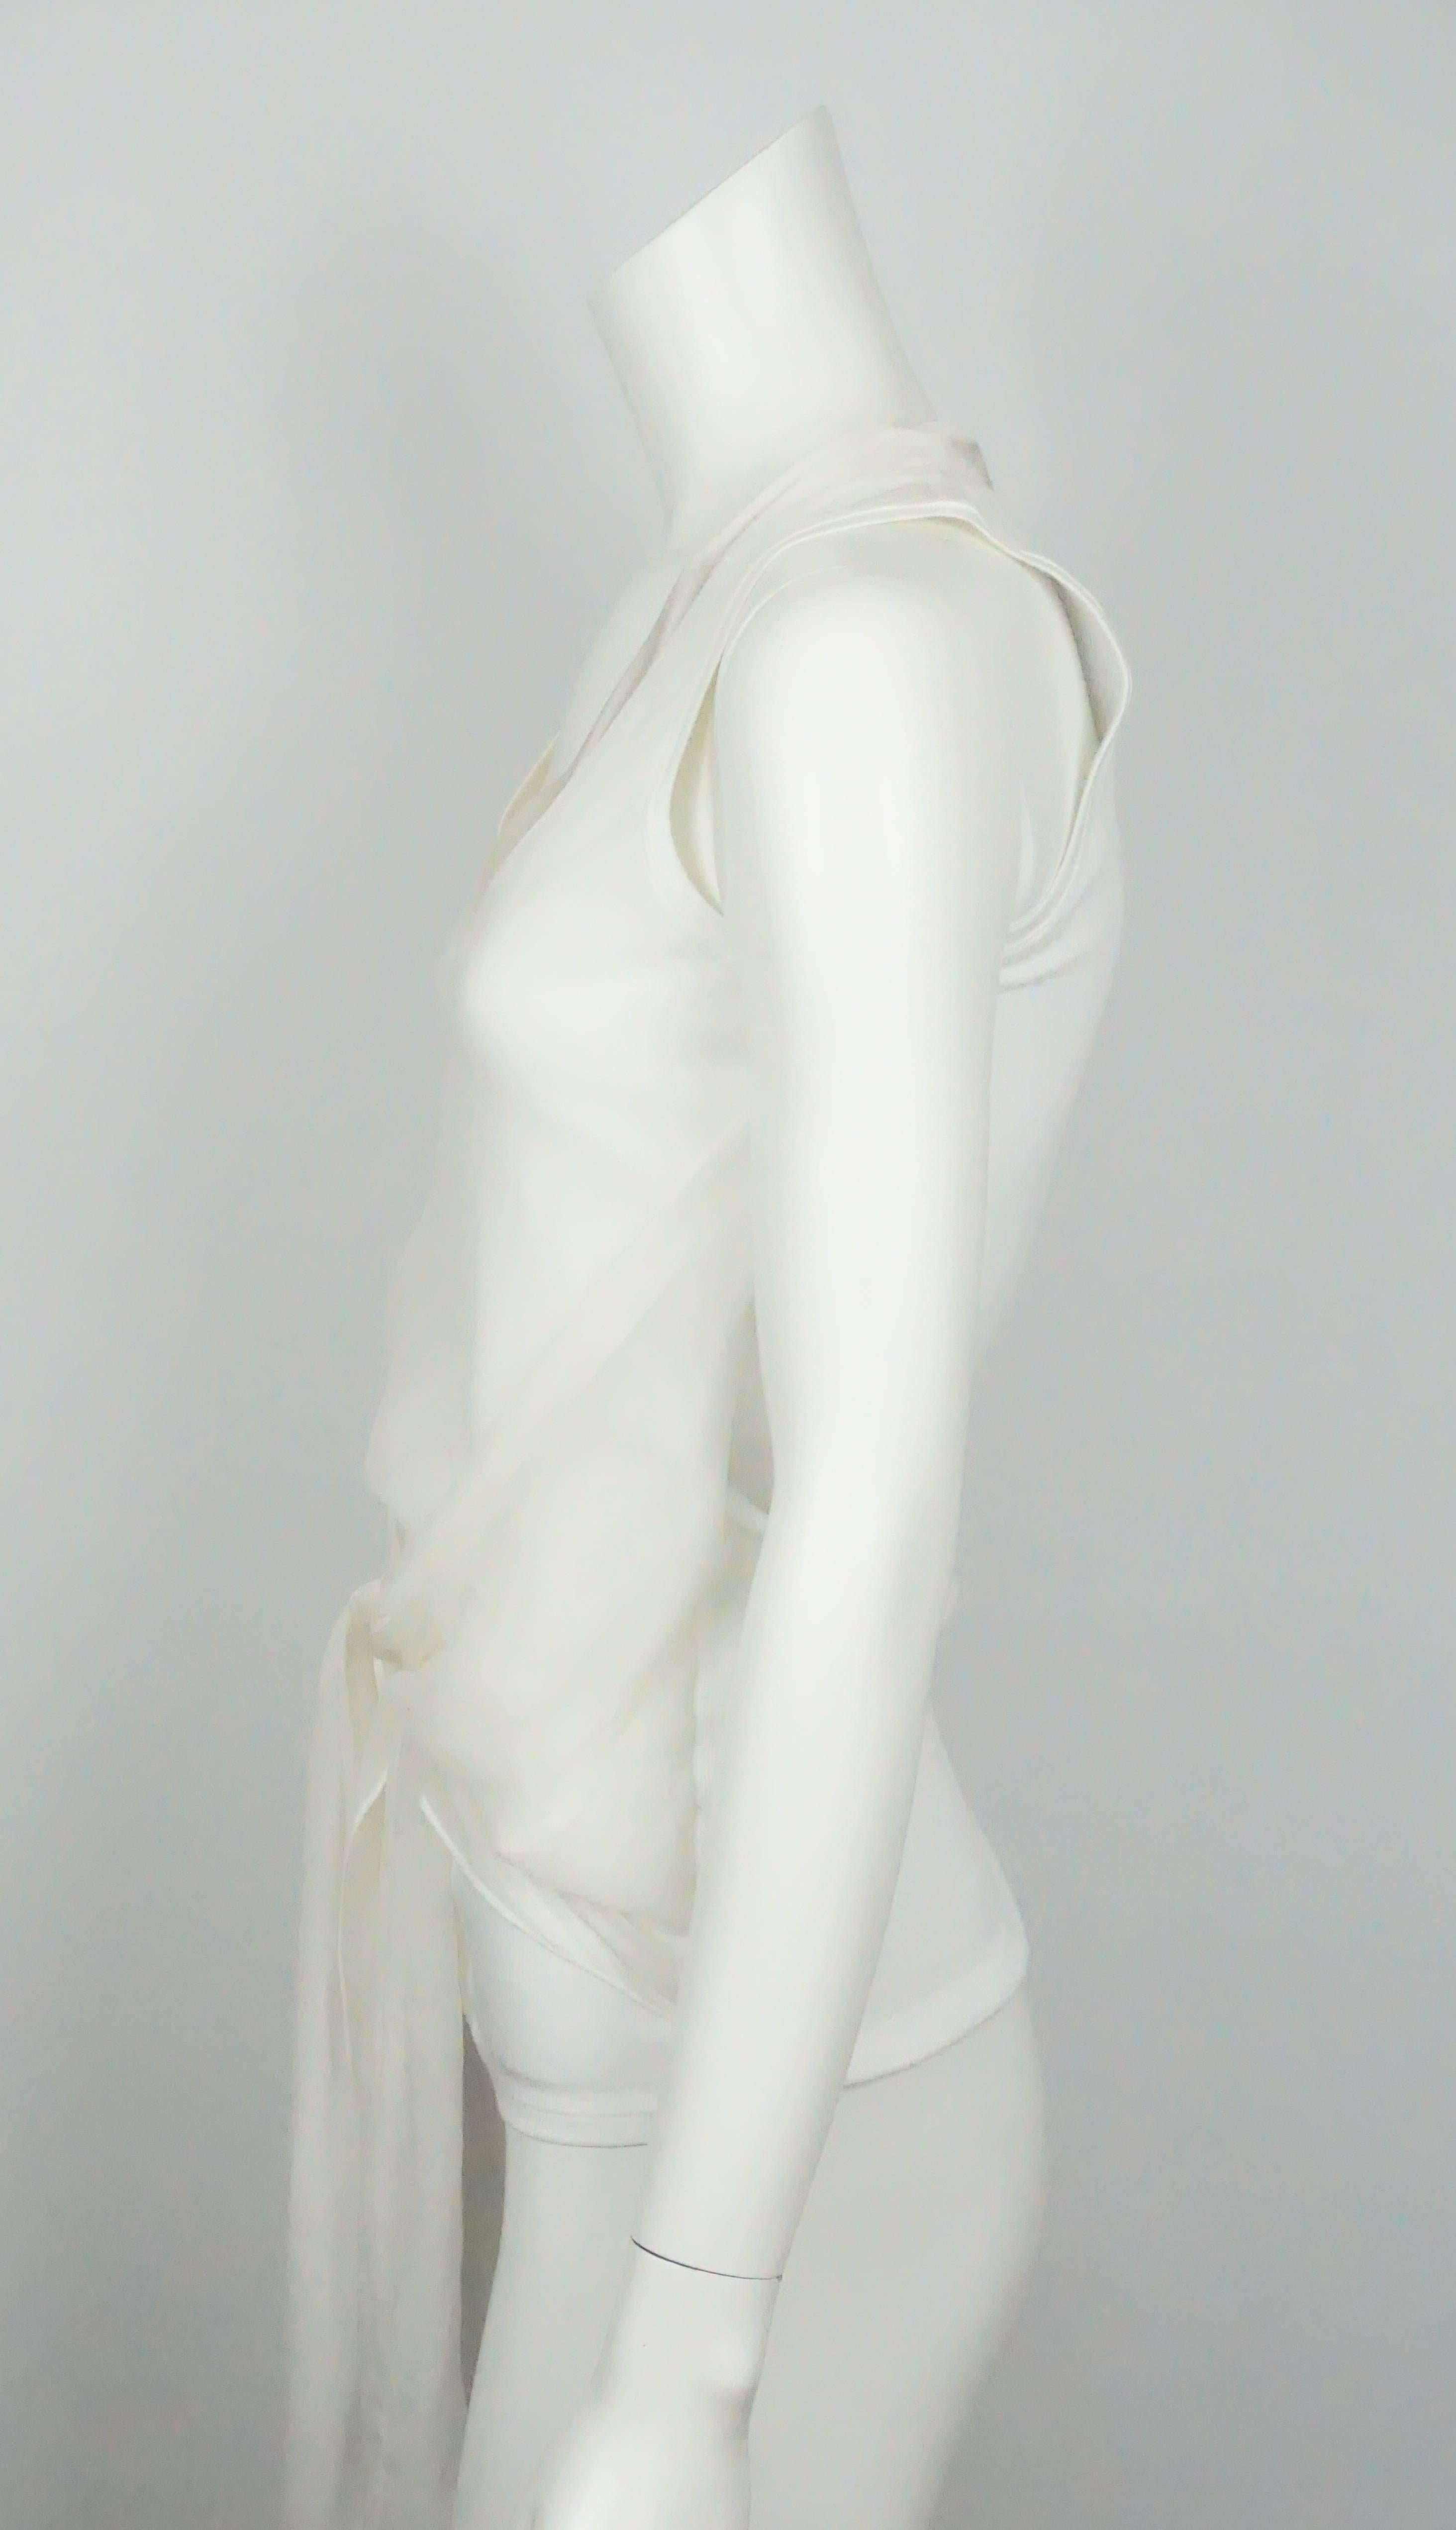 Brunello Cucinelli White Cotton Tank Top with Silk Chiffon Front Panel and Draping - M This top is a white cotton blend tank with a front silk chiffon layer that hangs a bit longer than the cotton, a scoop neckline with a silk trim and a silk